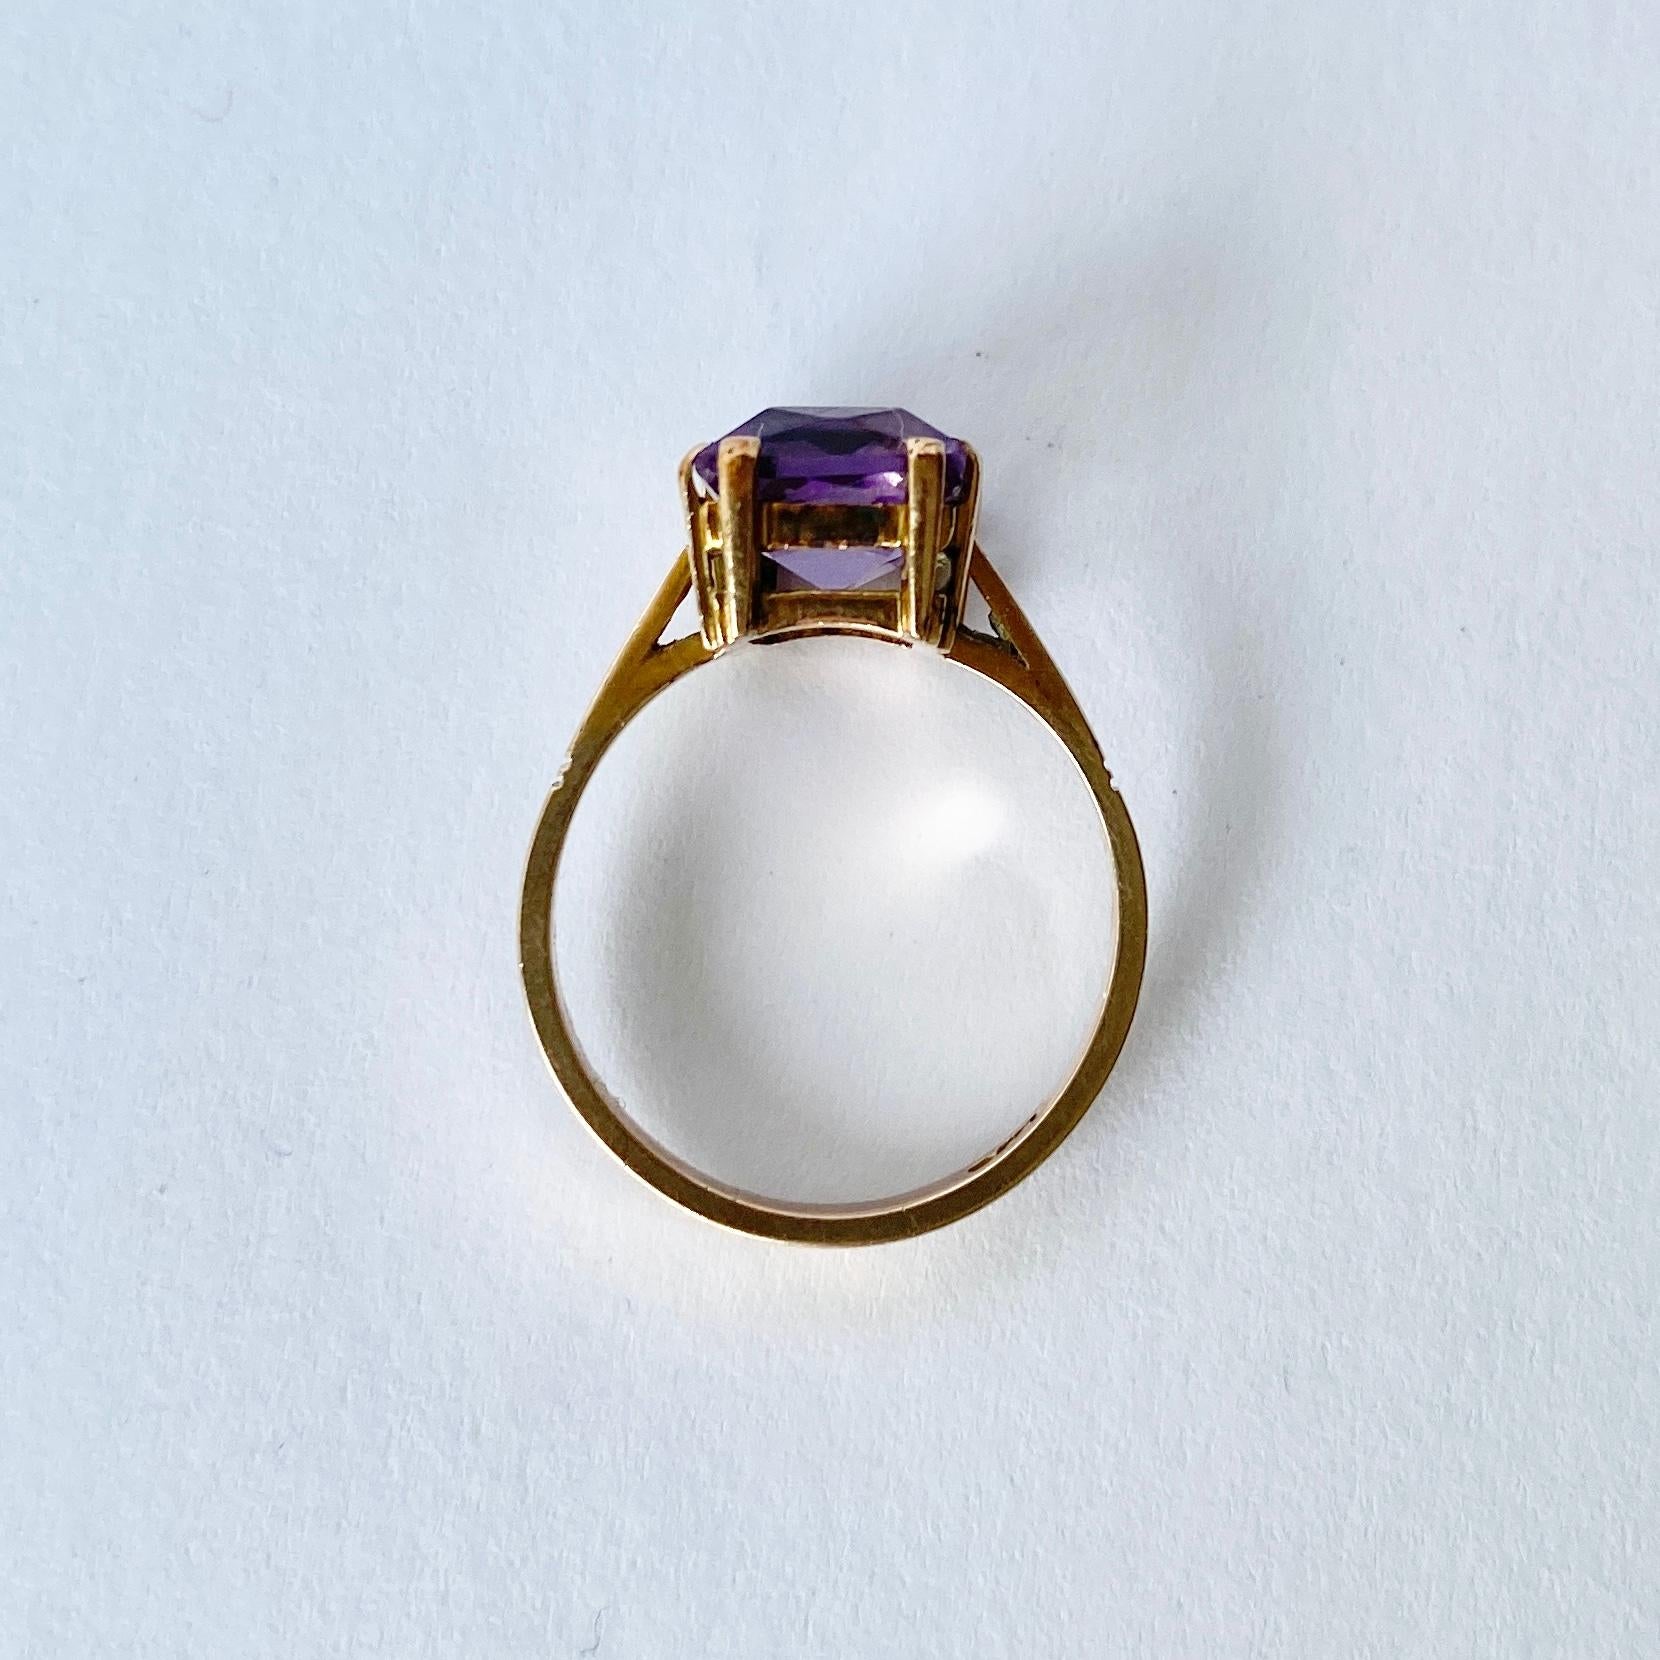 The amethyst set up high upon this ring is a gorgeous pale purple colour held in double claws. Modelled in 9carat gold.

Ring Size: M or 6 1/4 
Stone Dimensions: 10x8mm 
Height Off Finger: 6.5mm 

Weight: 3.1g